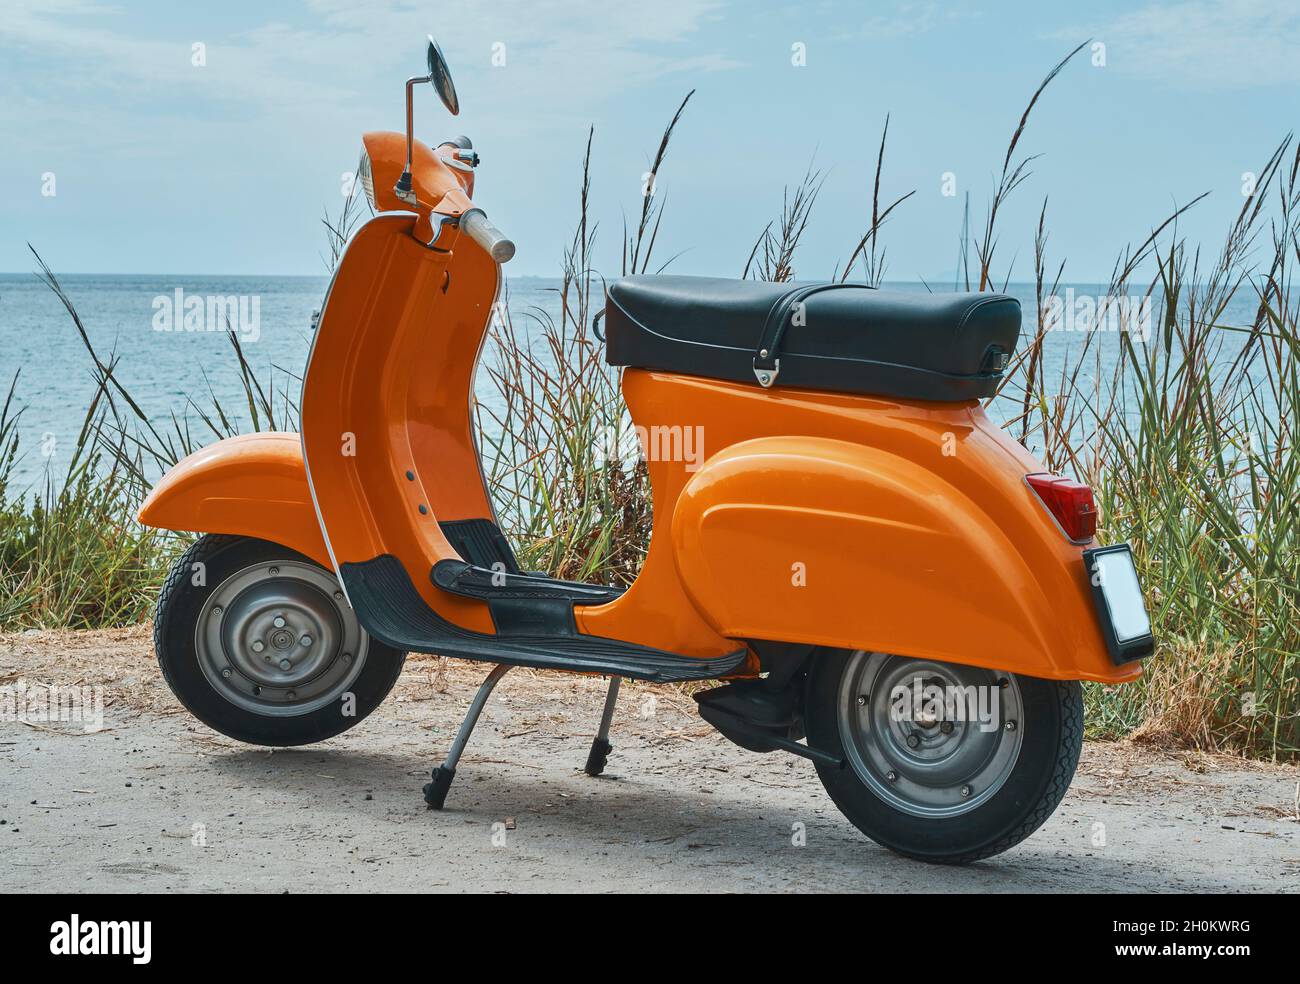 Vintage orange scooter parking on the beach. Stock Photo